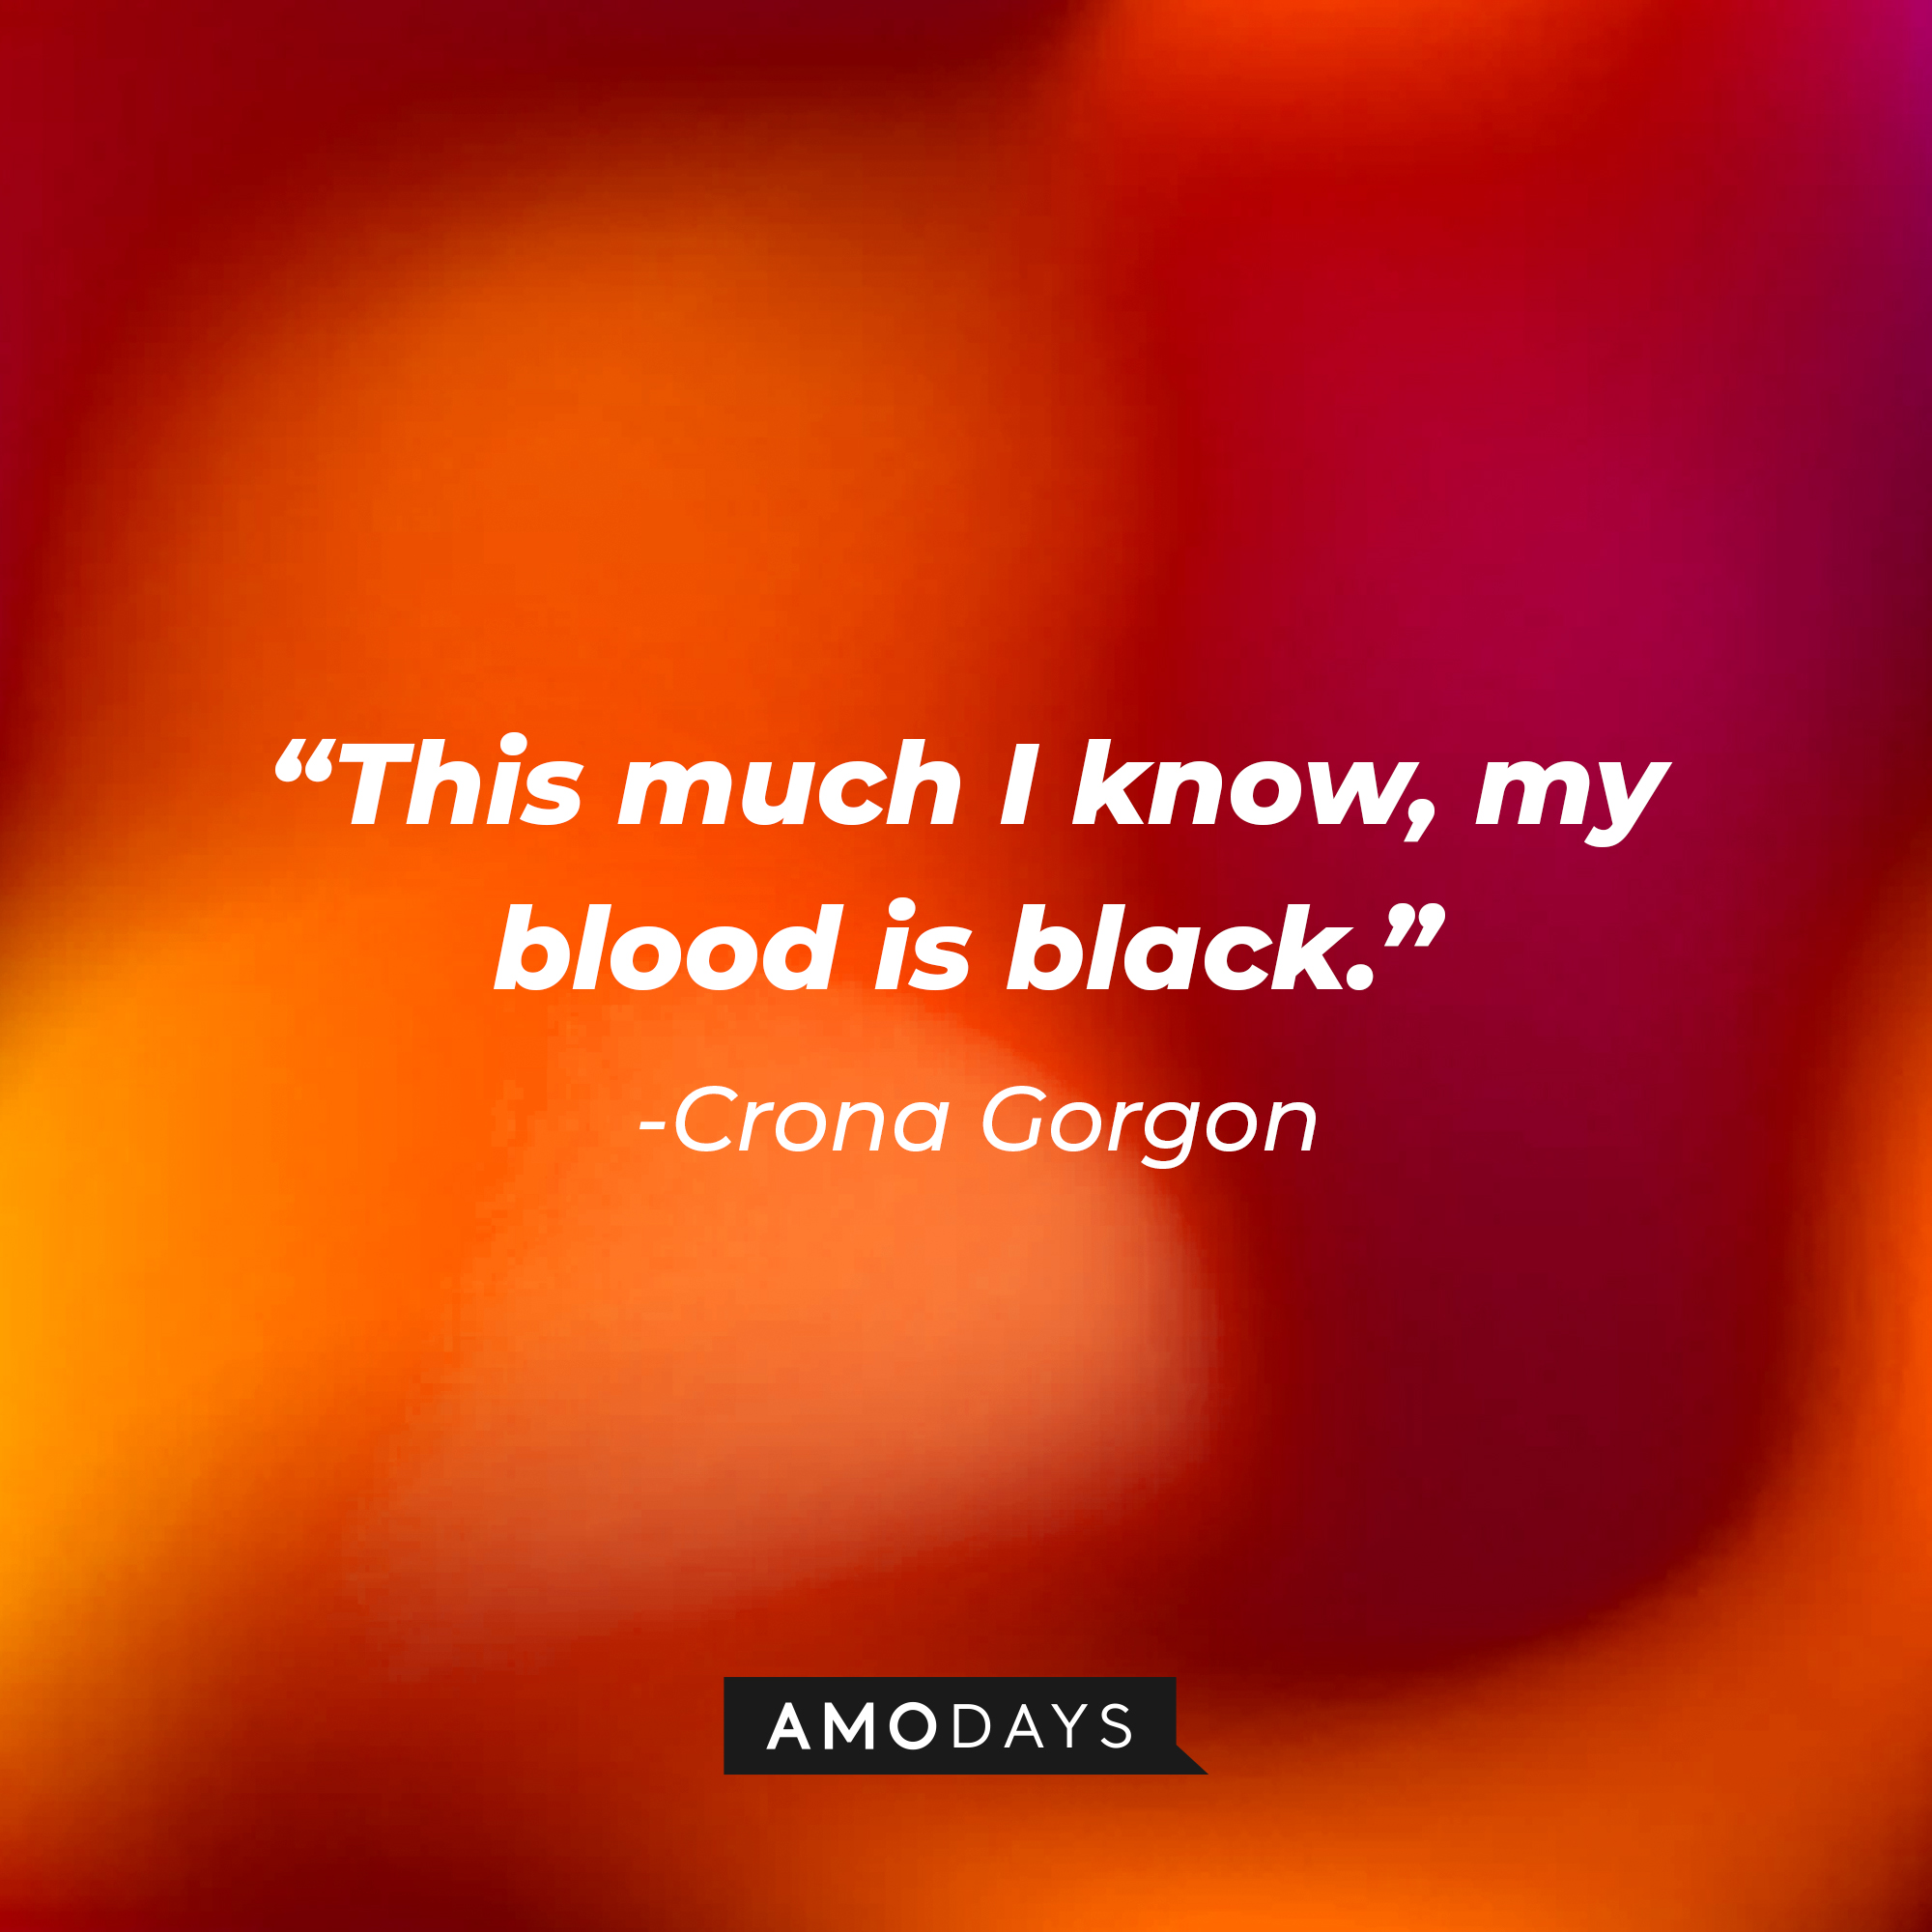 Crona Gorgon’s quote: "This much I know, my blood is black." | Image: AmoDays